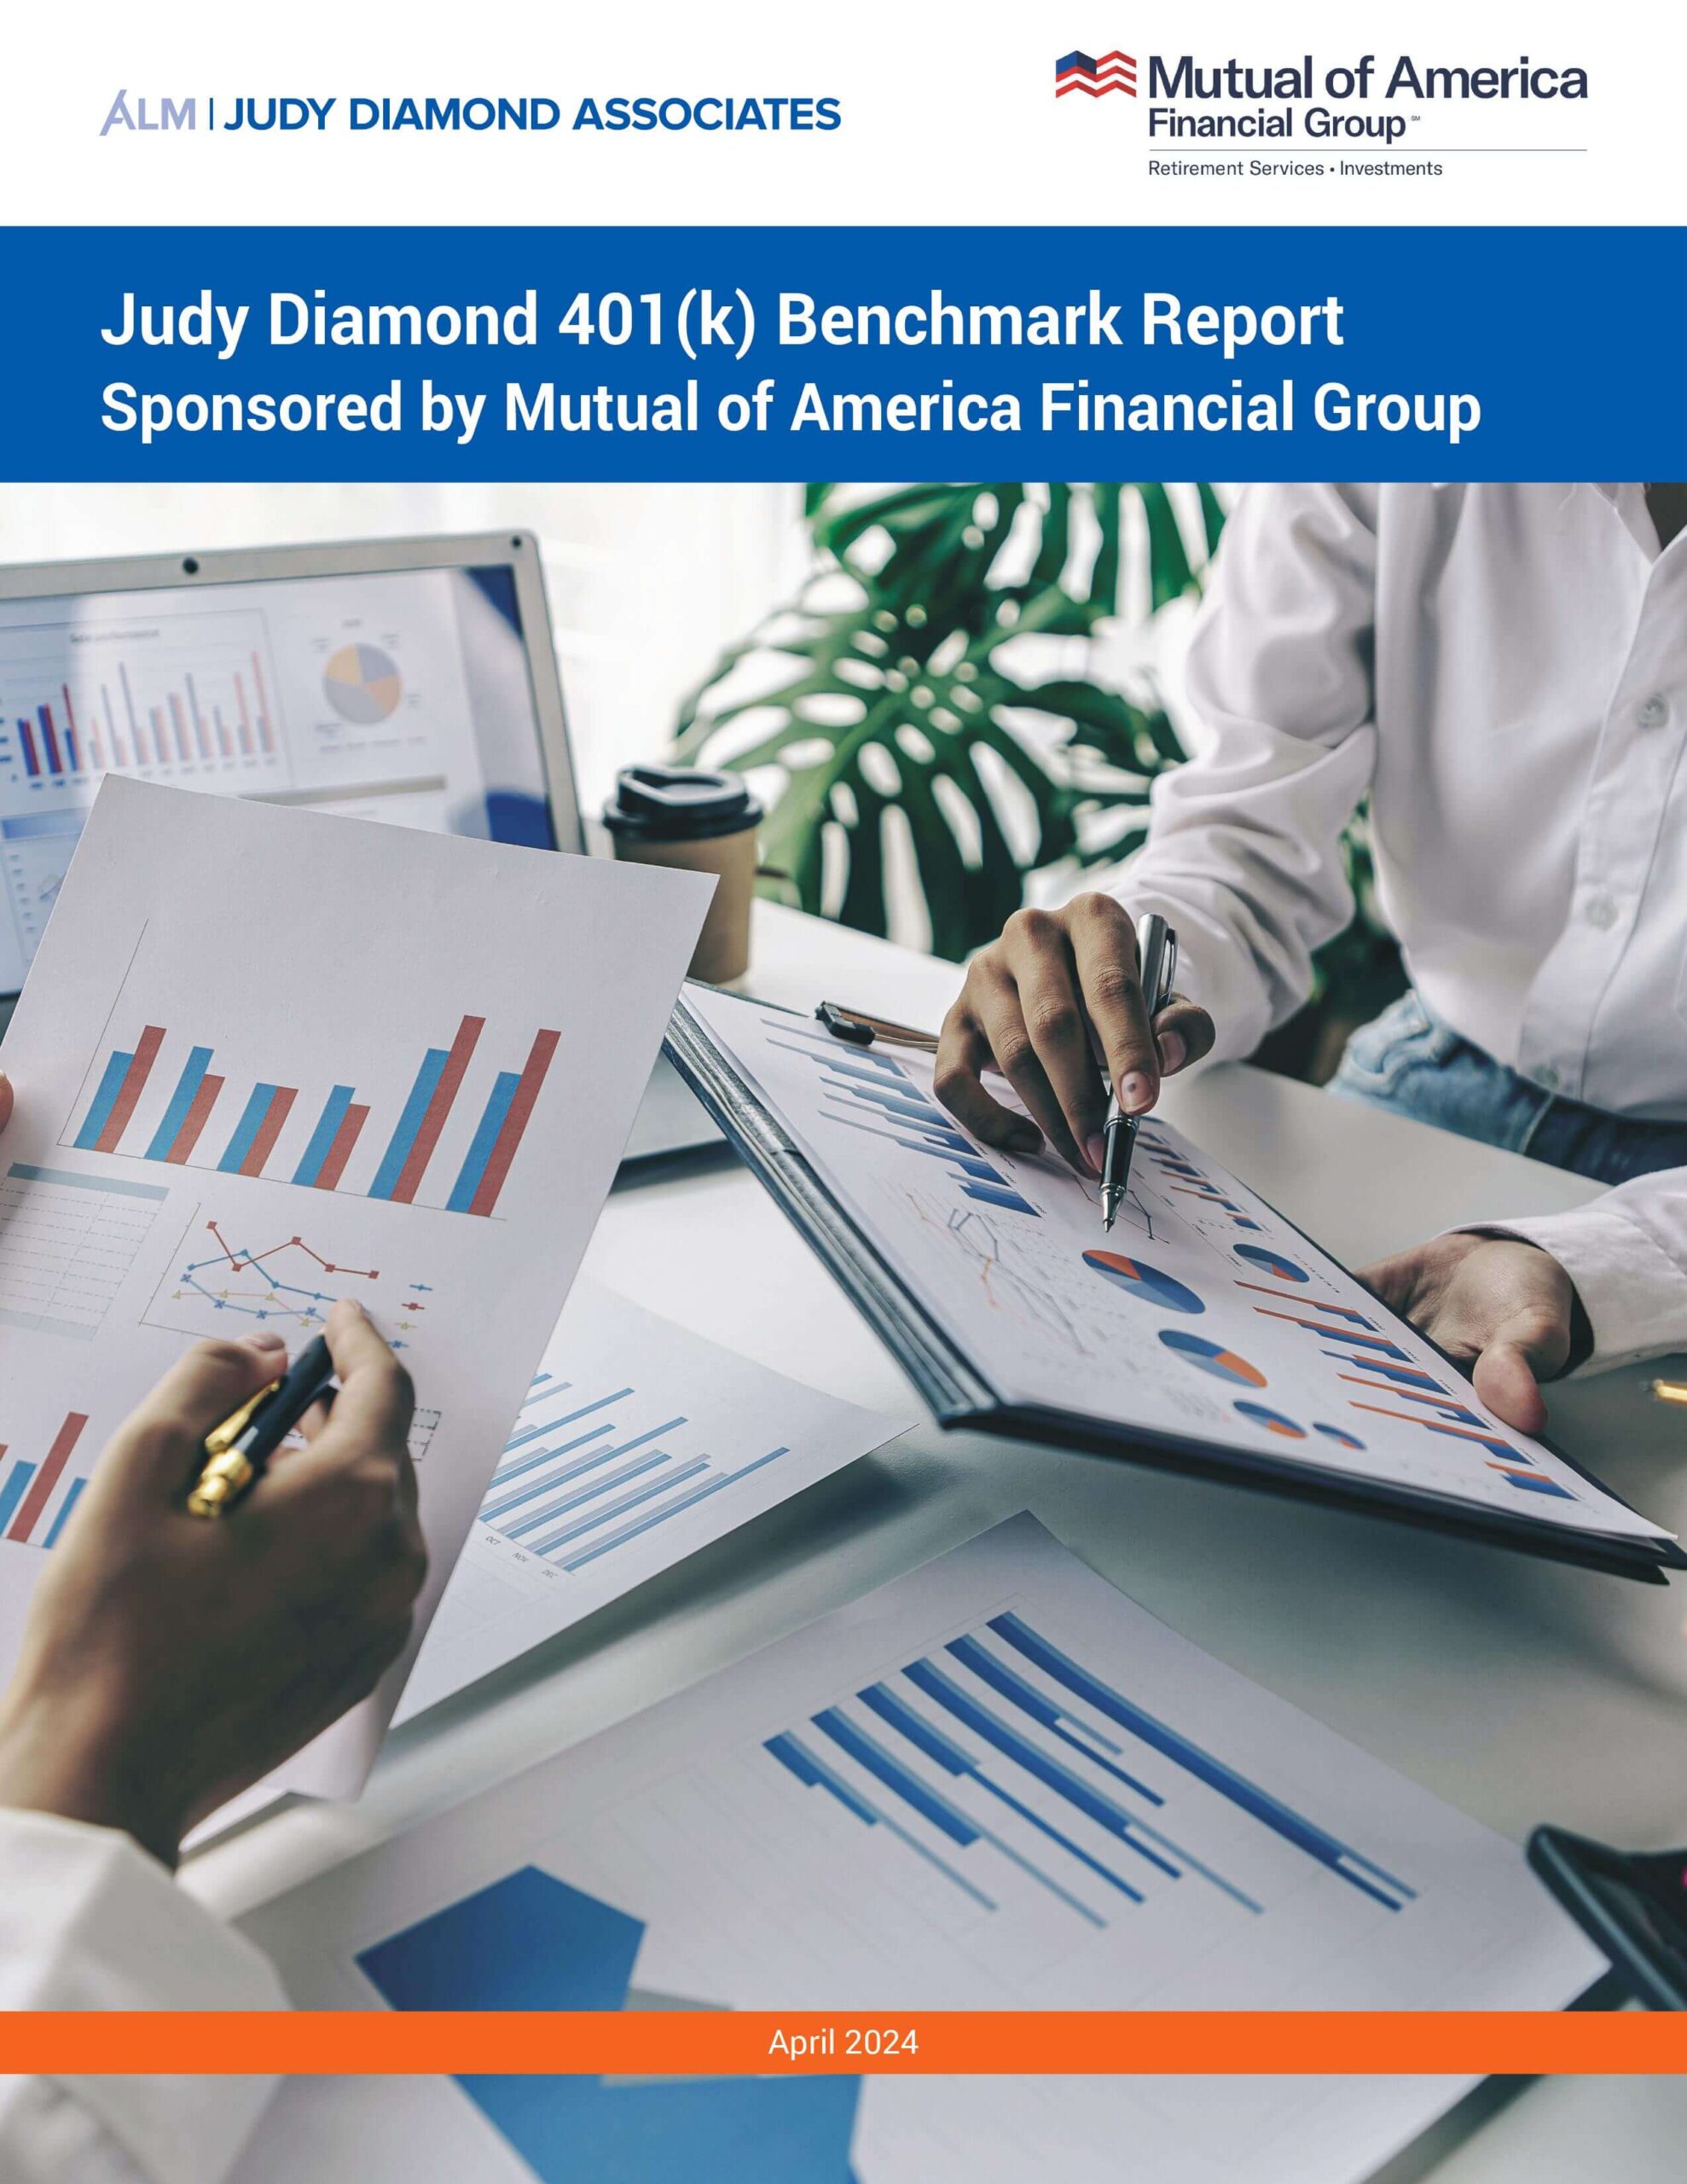 Benchmark Report Cover